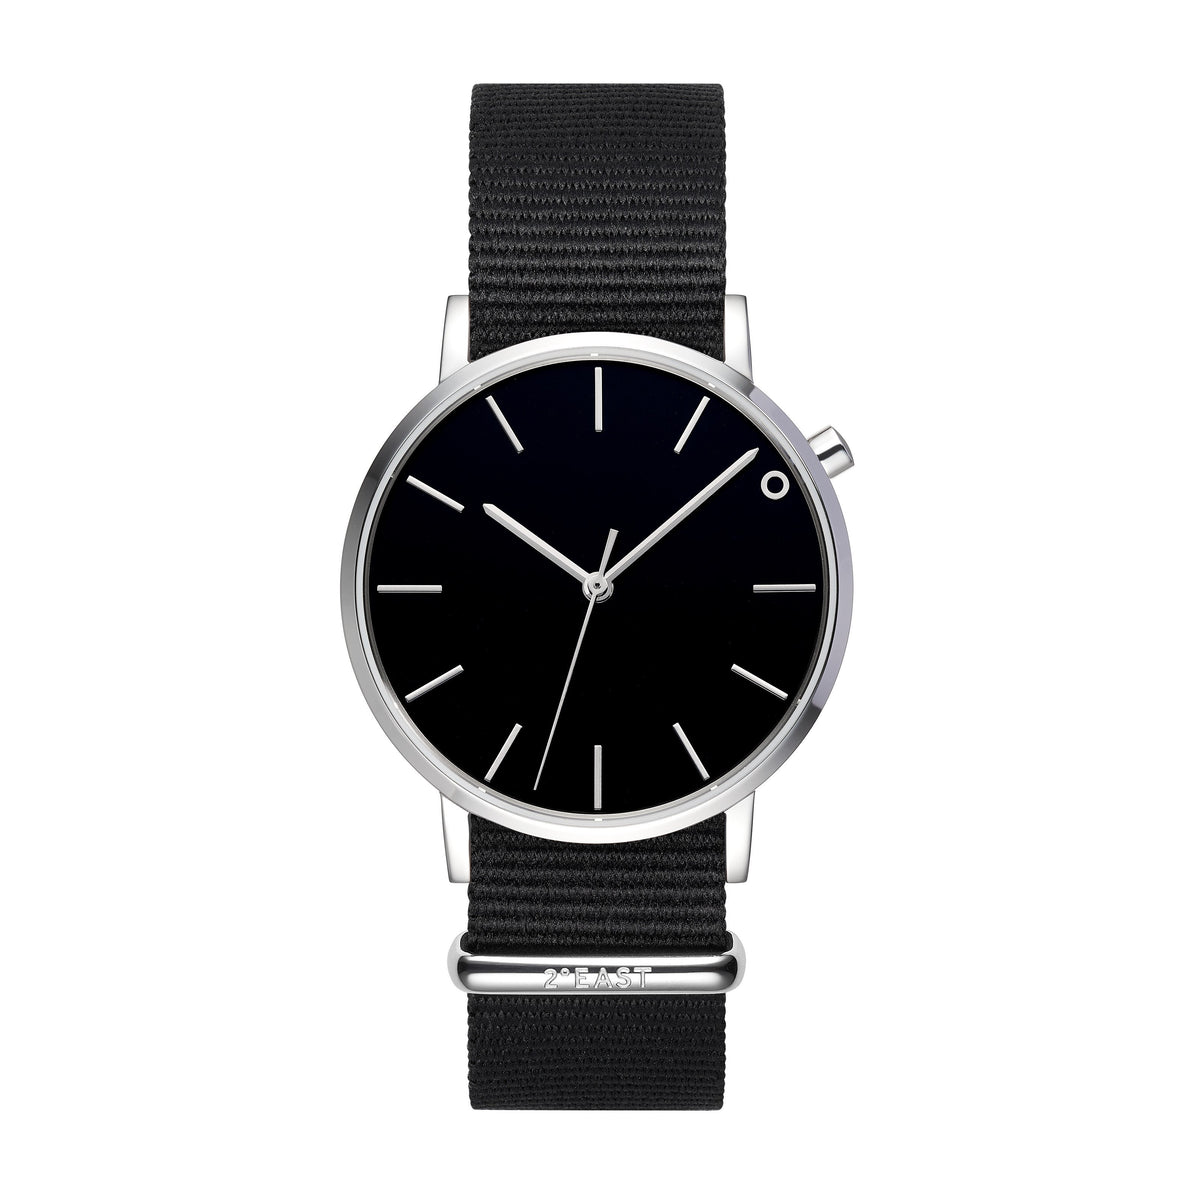 The Black and Silver Watch - NATO